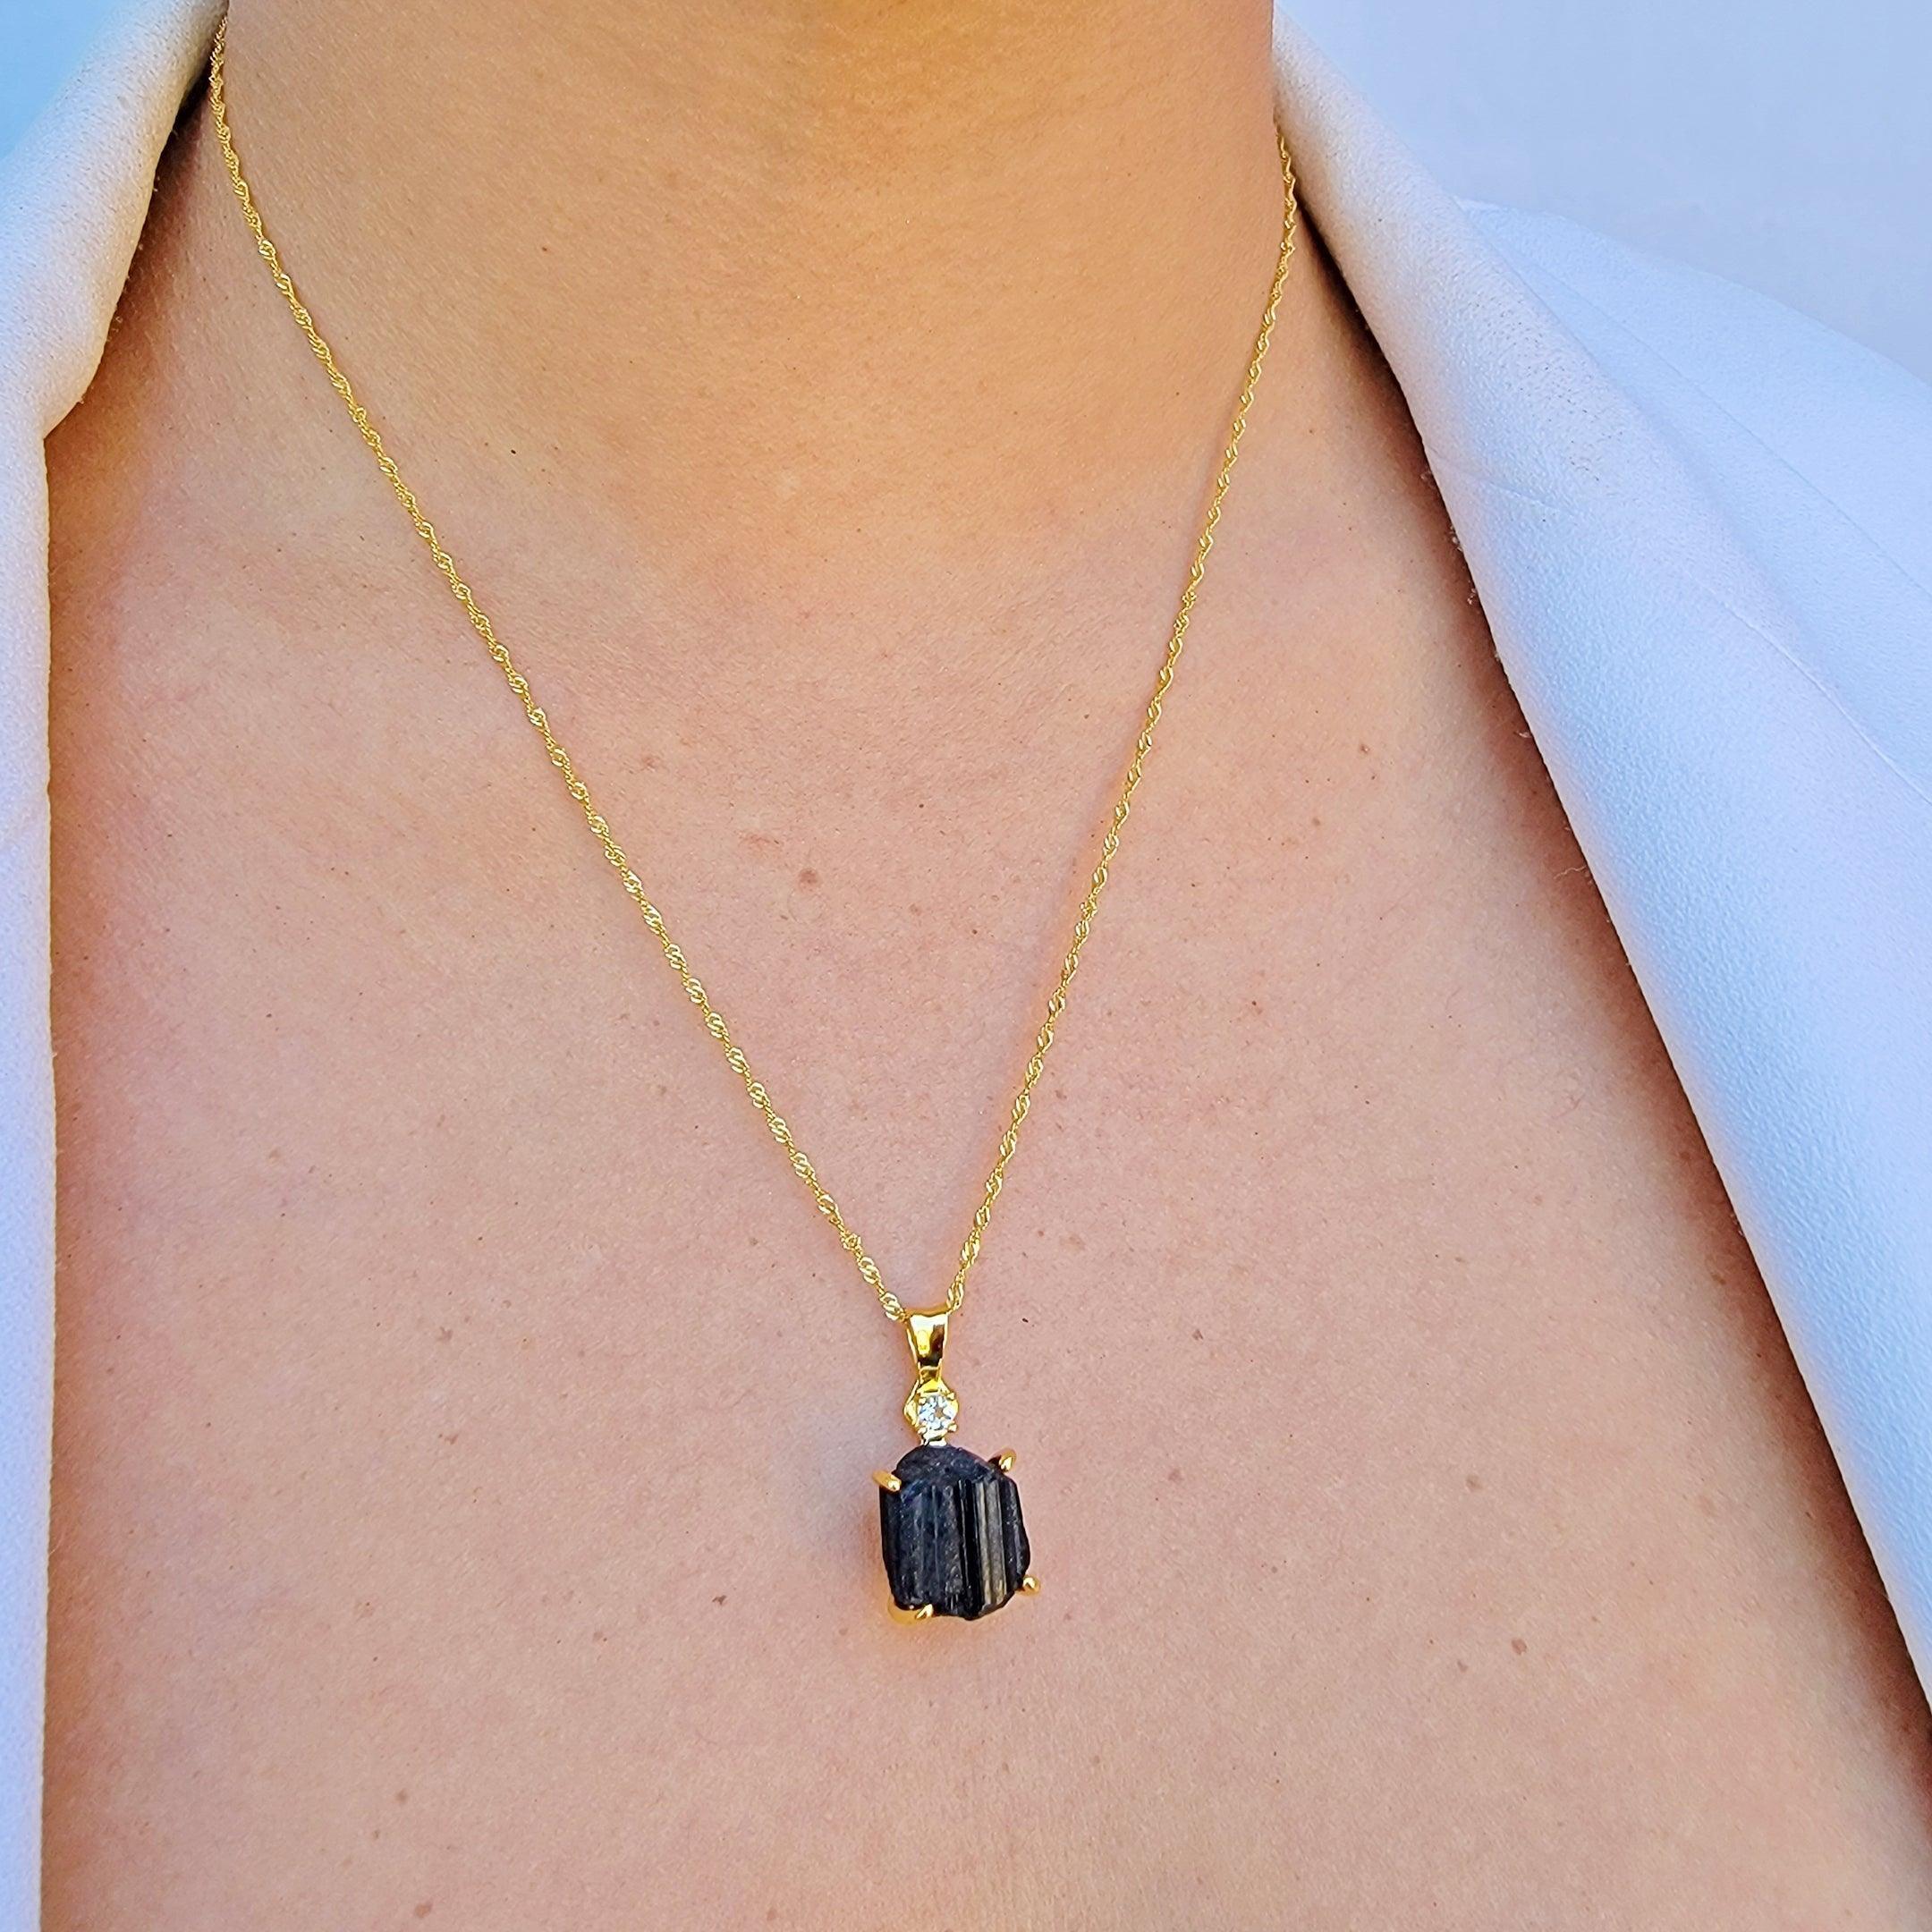 Amazon.com: Liquid Emotions Raw Black Tourmaline Pendant Necklace - Crystal  Healing Negative Energy Protection Stress Releaser with Cord - Tourmaline  Necklace for Women : Health & Household